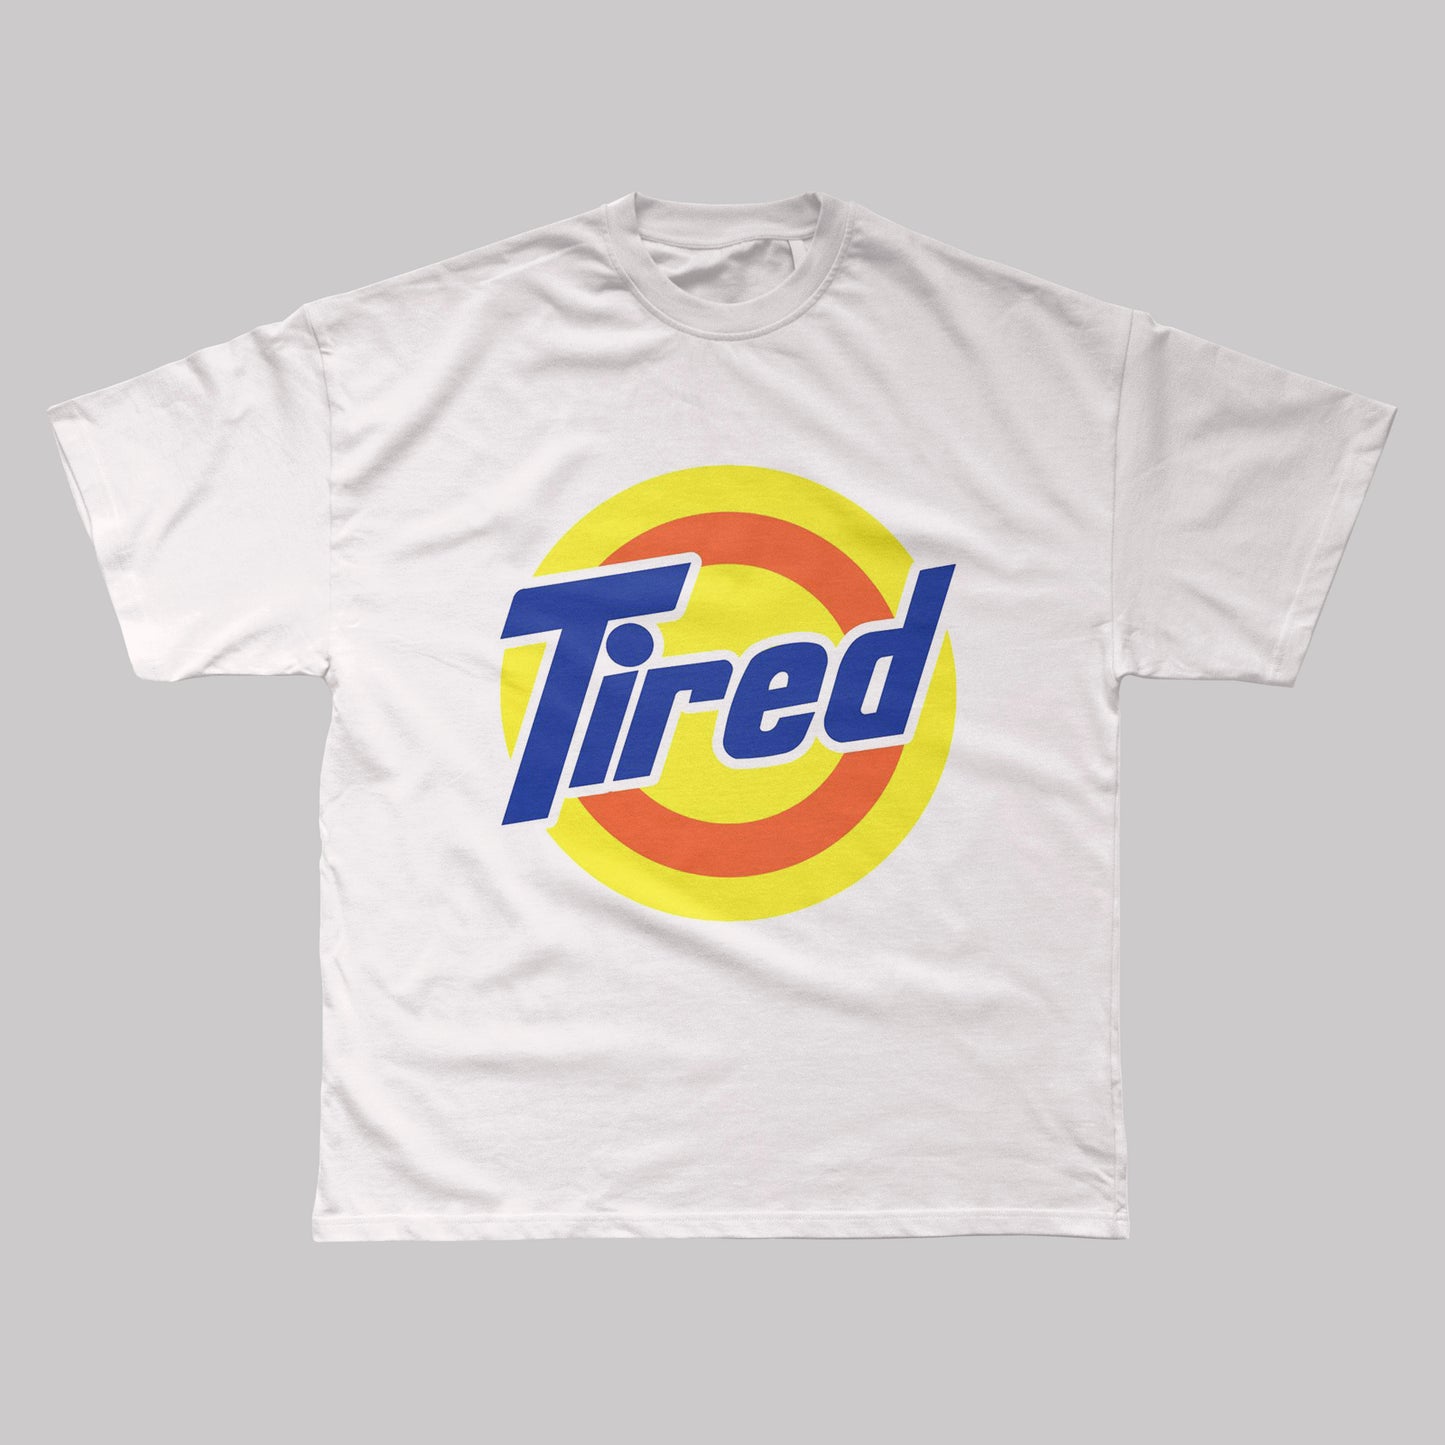 Tired T-shirt OVERSIZED FIT